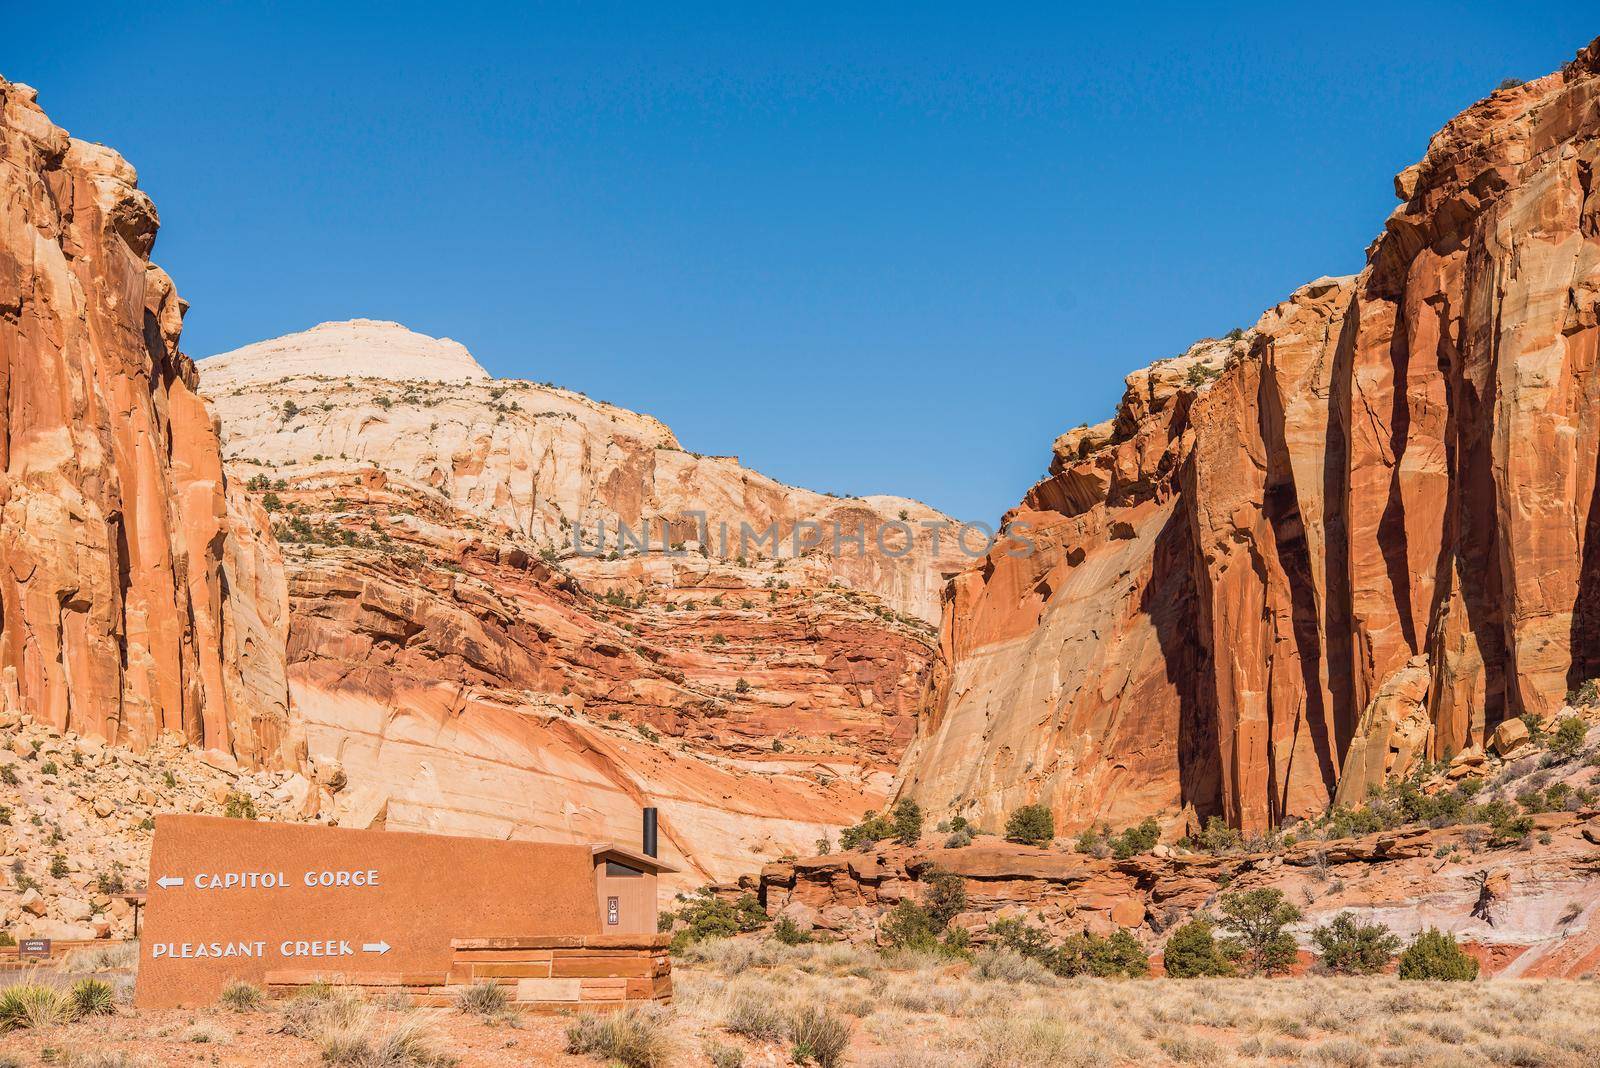 Capitol Gorge and Pleasant Creek Trails Sign in Capitol Reef National Park, Utah, United States. by welcomia